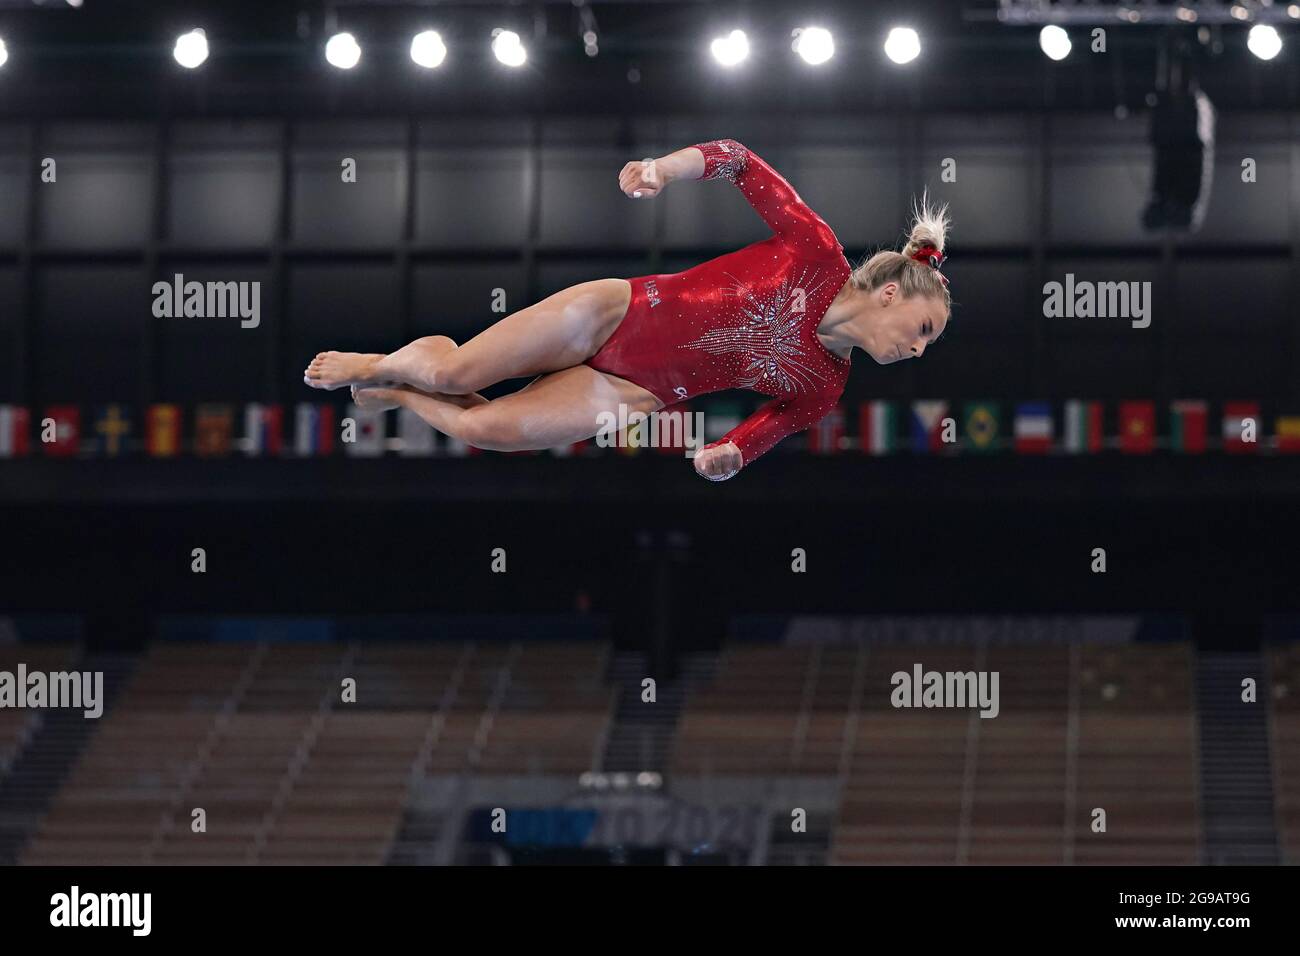 Tokyo, Japan. 25th July, 2021. United States Artistic Gymnast Mykayla Skinner during her qualifying round on the balance beam at Ariake Gymnastics Centre at the Tokyo Olympic Games in Tokyo, Japan, on Sunday July 25, 2021. Photo by Richard Ellis/UPI. Credit: UPI/Alamy Live News Stock Photo